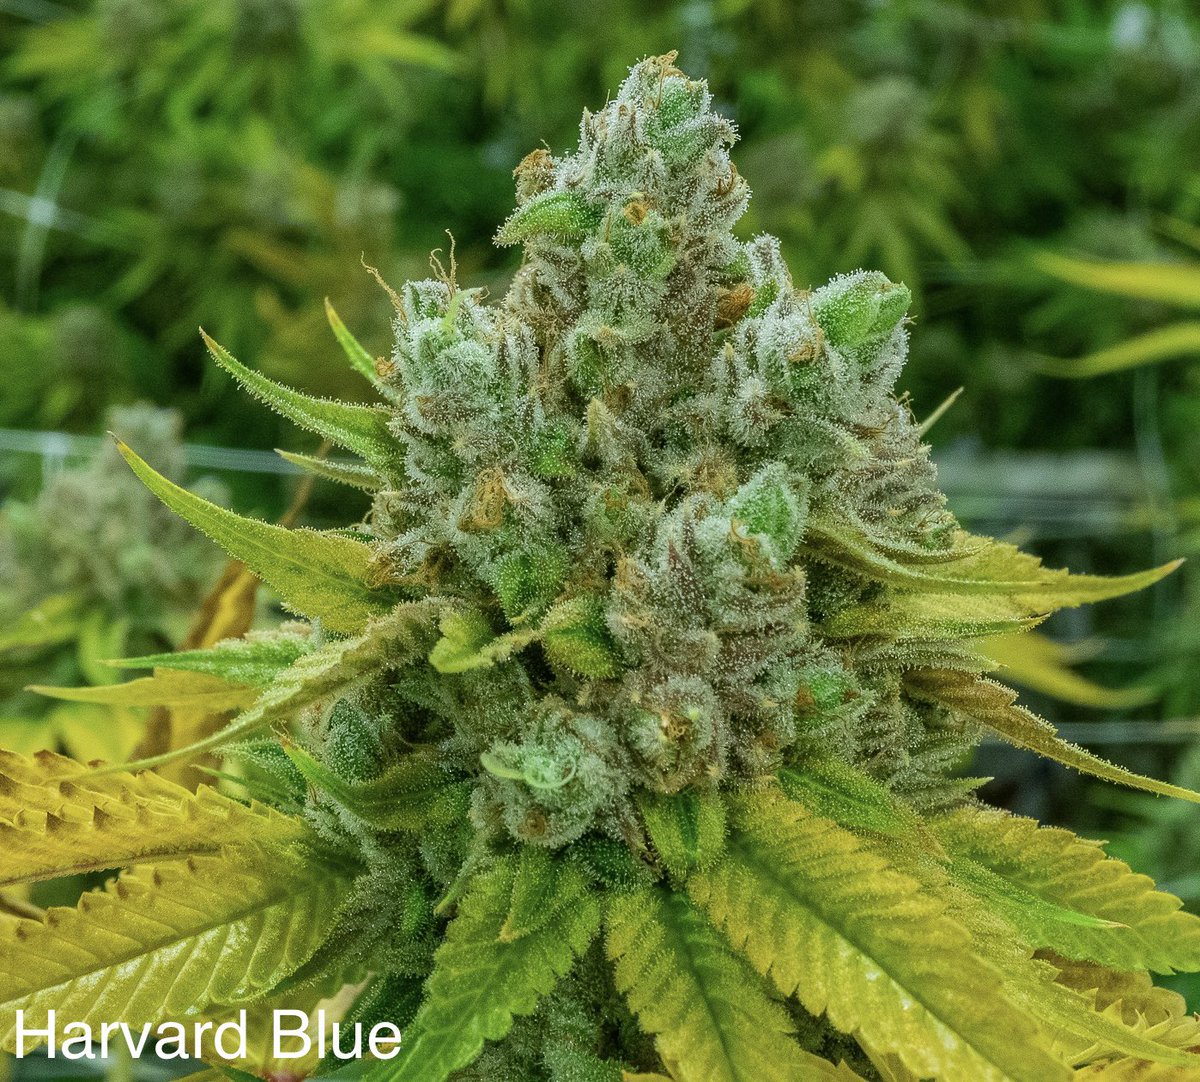 This weeks #giveaway is for a pack of NBG Seed Co.‘s Harvard Blue (ECSD x Fillmore Slim) and it begins now! 🚨Rules🚨 • Follow @nbg_growhouse & @nbg_seedco • Tag 3 friends • Like + Retweet 🎉 Winner announced on 11/27! Good luck! #NBGGrowhouse #NBGSeedCo